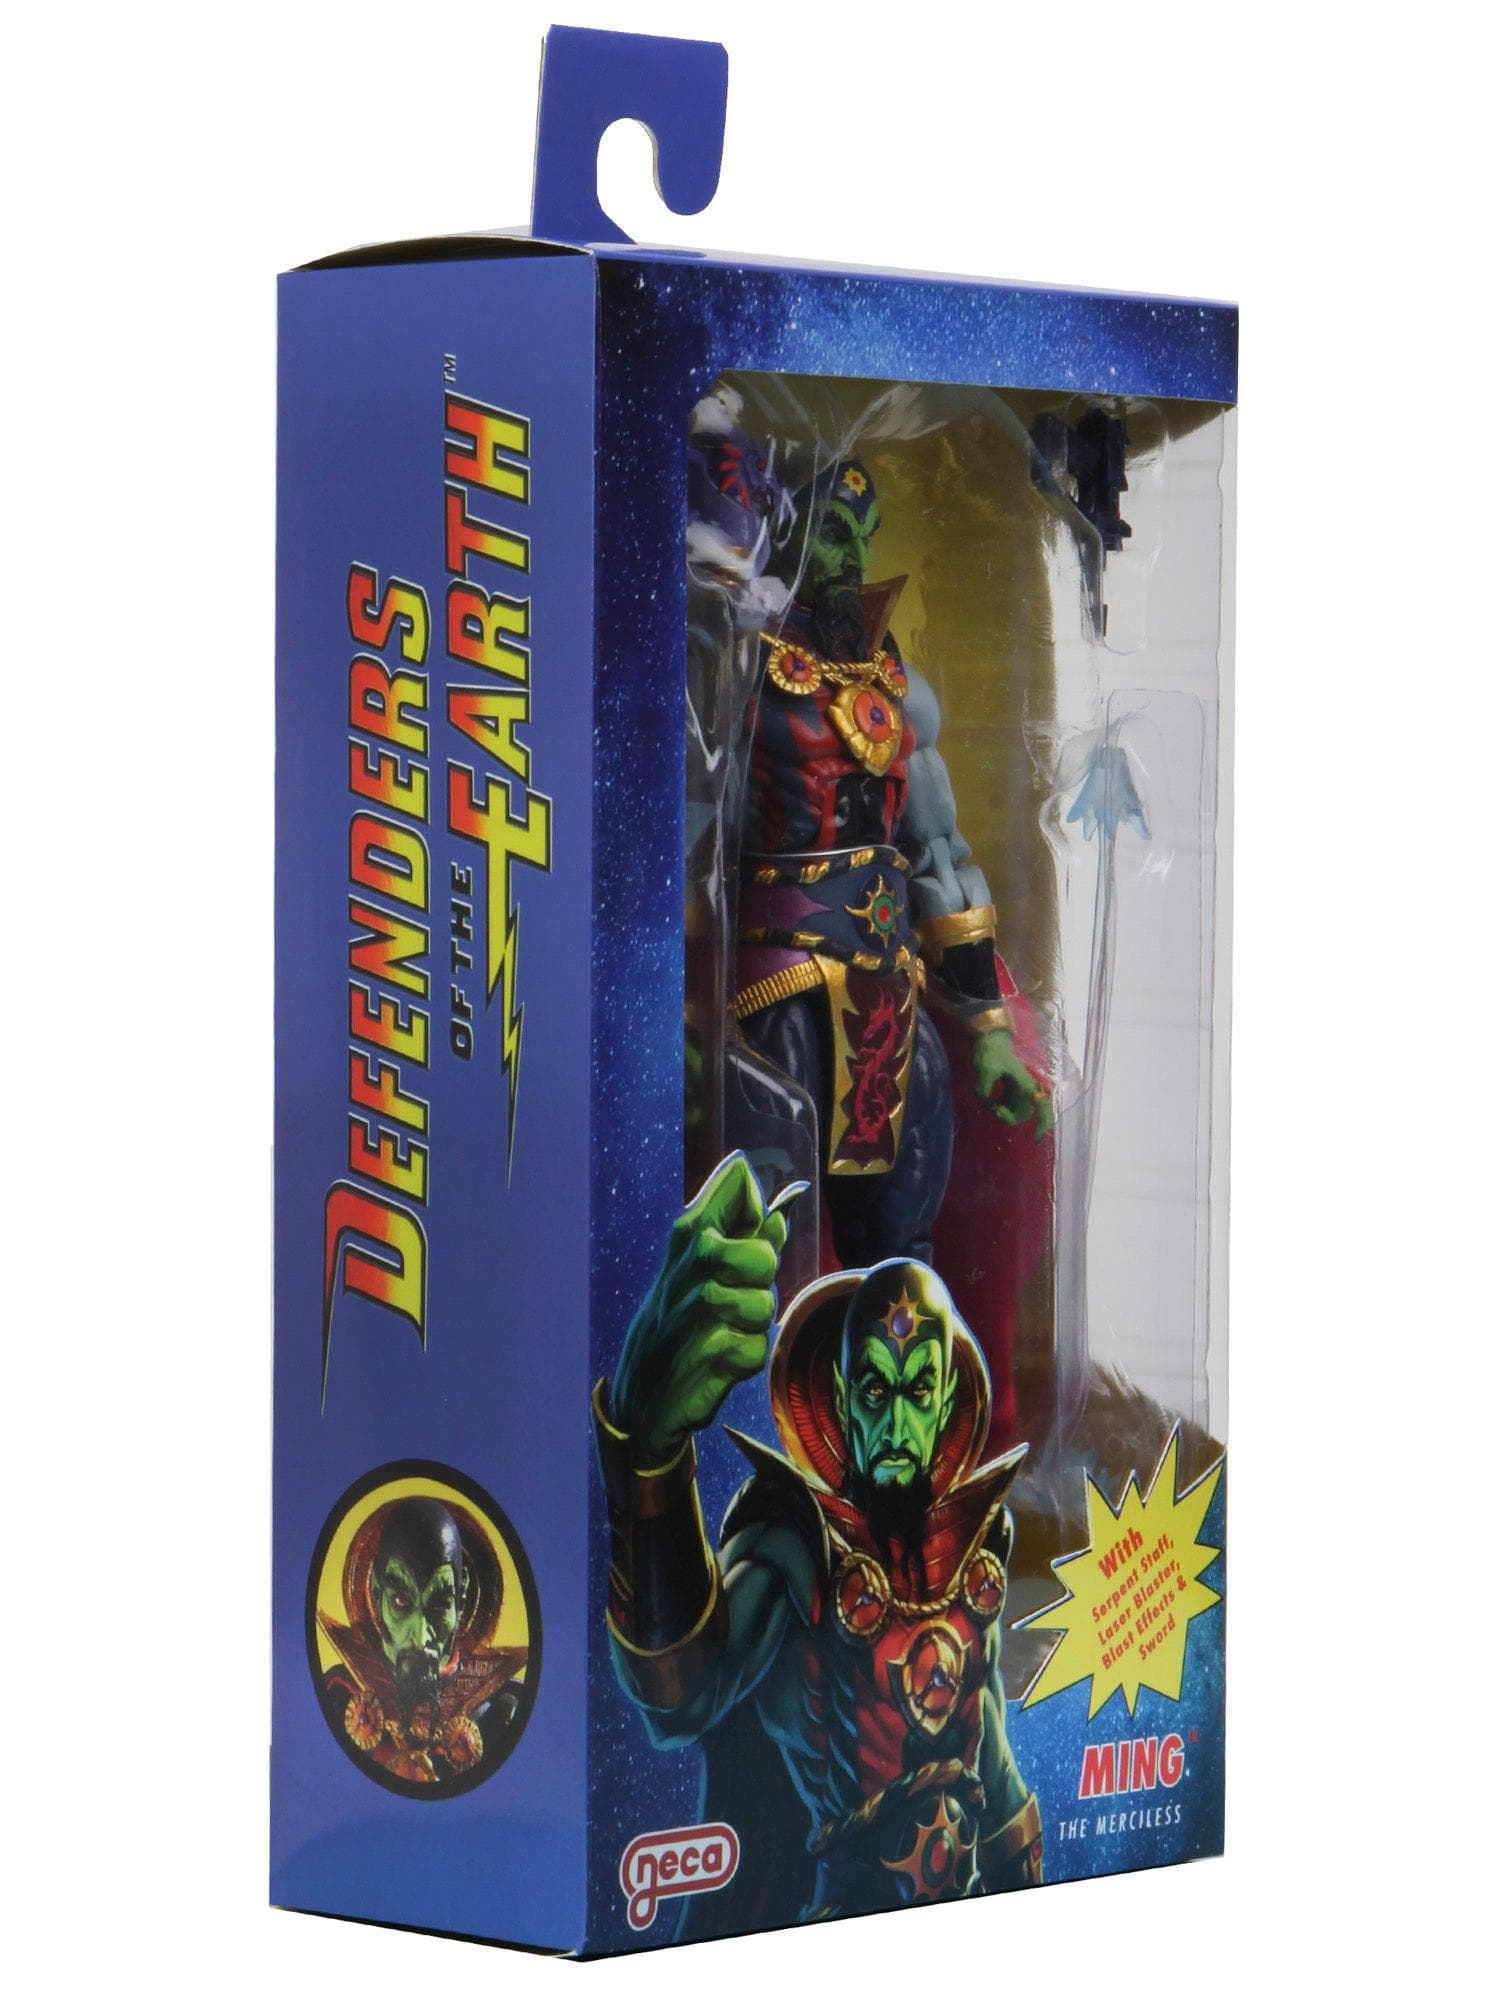 NECA - King Features - 7" Scale Action Figure - Defenders of the Earth Series Ming the Merciless - costumes.com